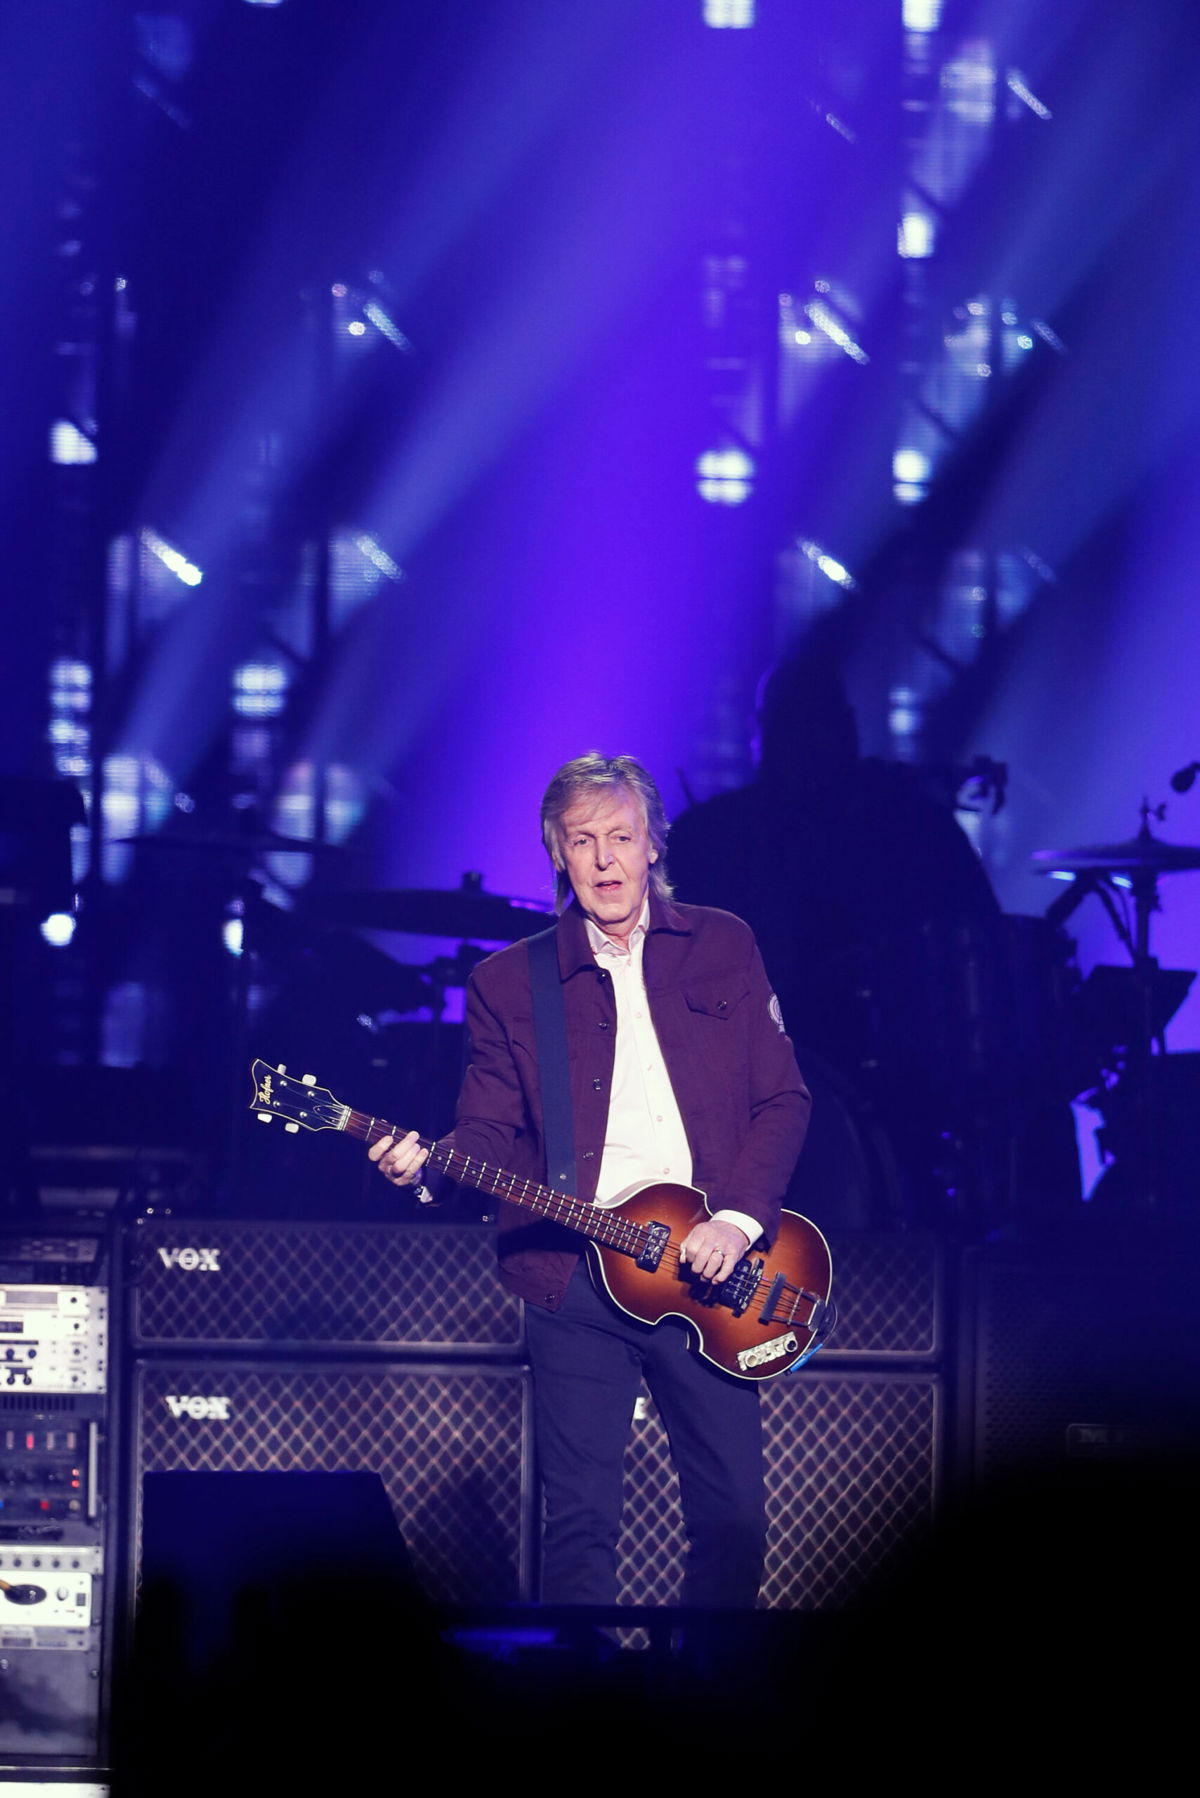 <i>Scott Strazzante/San Francisco Chronicle/Getty Images</i><br/>Paul McCartney has revealed it was John Lennon who instigated the breakup of the Beatles. McCartney is shown here during a concert for his Freshen Up tour at SAP Center in San Jose